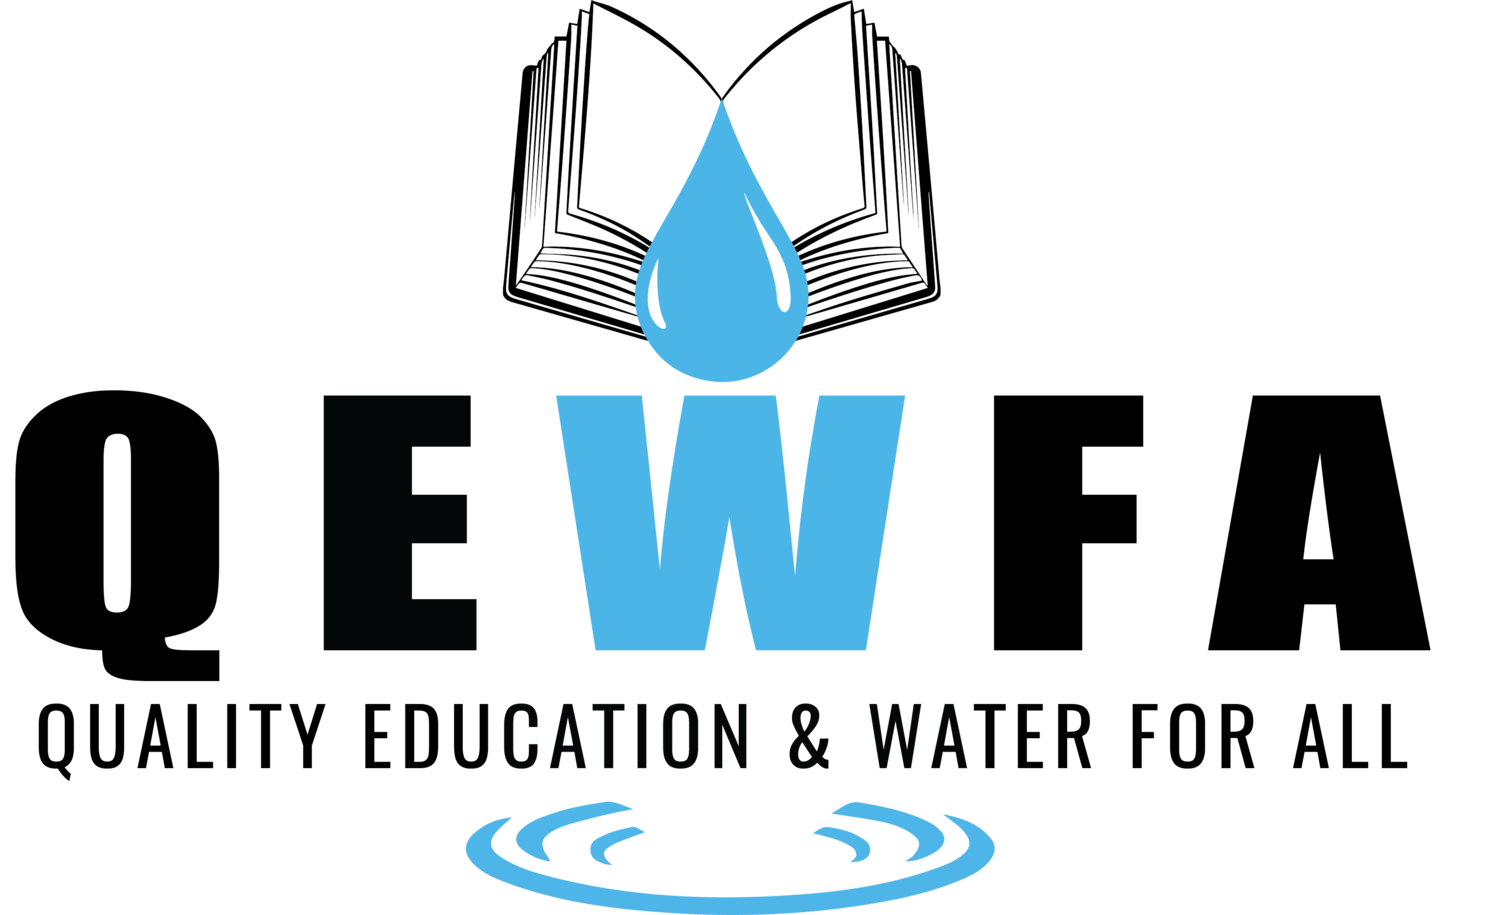 Quality Education and Water for All logo